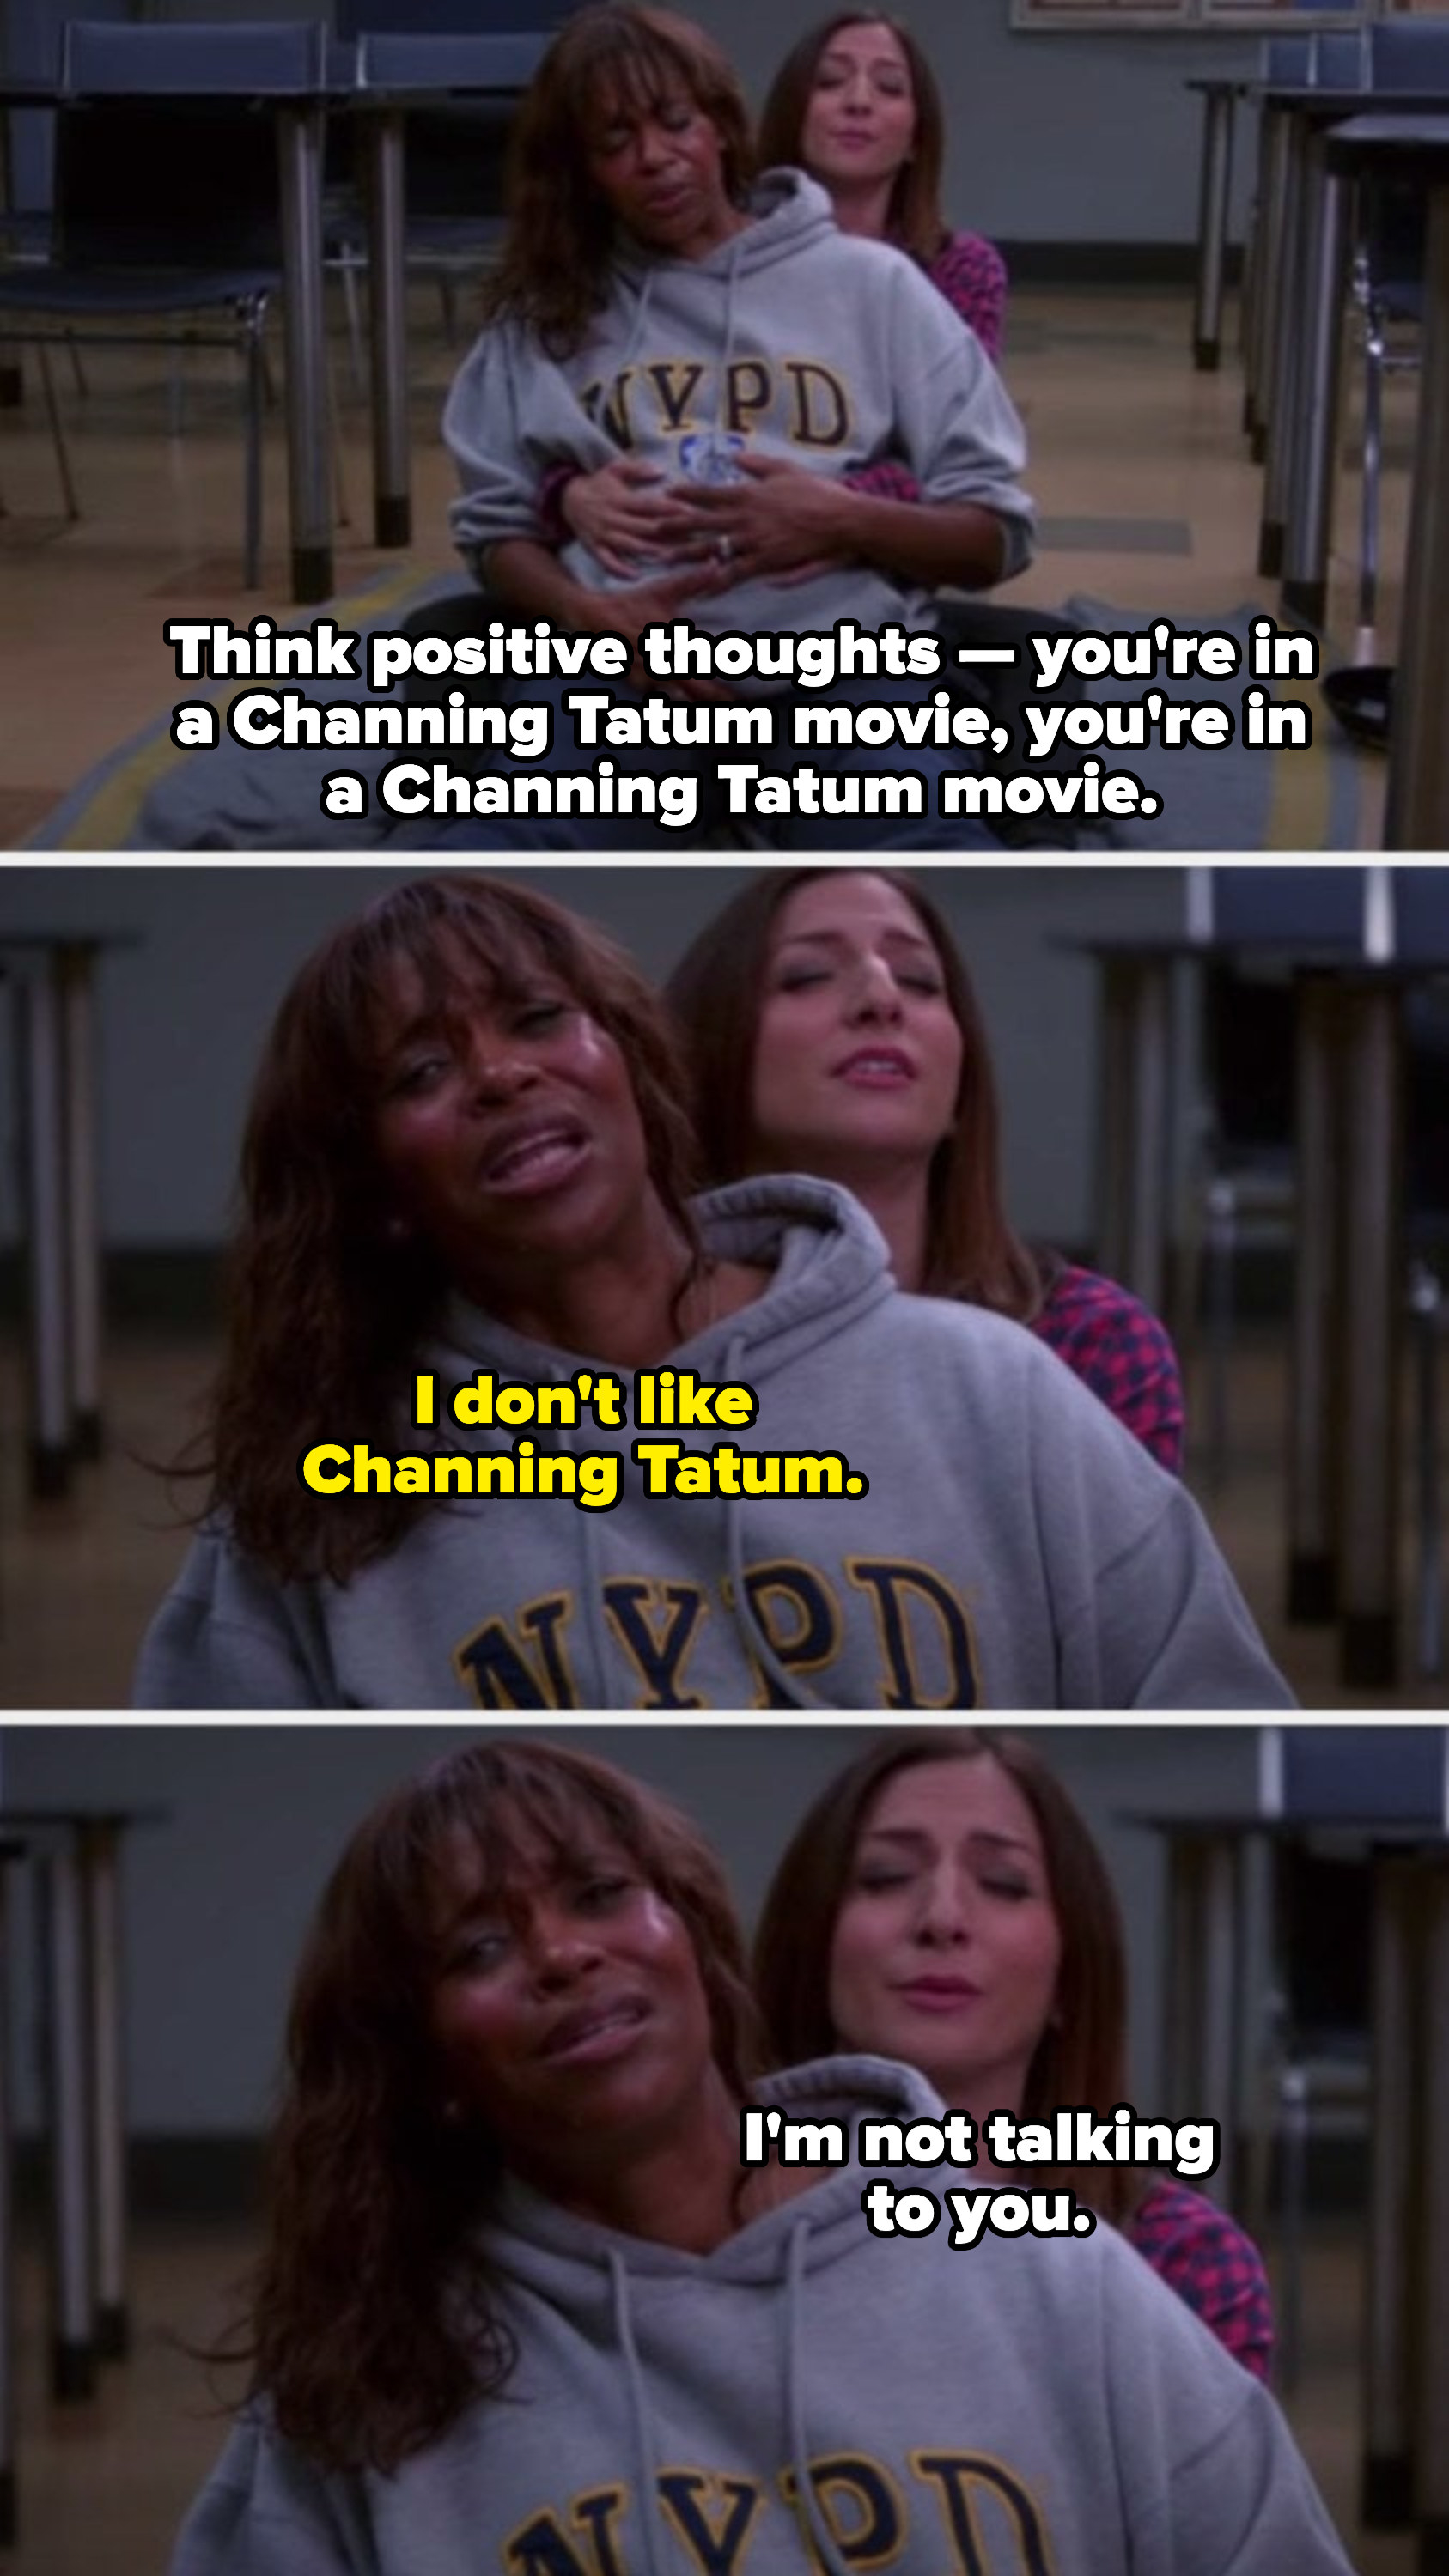 Gina: &quot;Think positive thoughts — you&#x27;re in a Channing Tatum movie, you&#x27;re in a Channing Tatum movie.&quot;